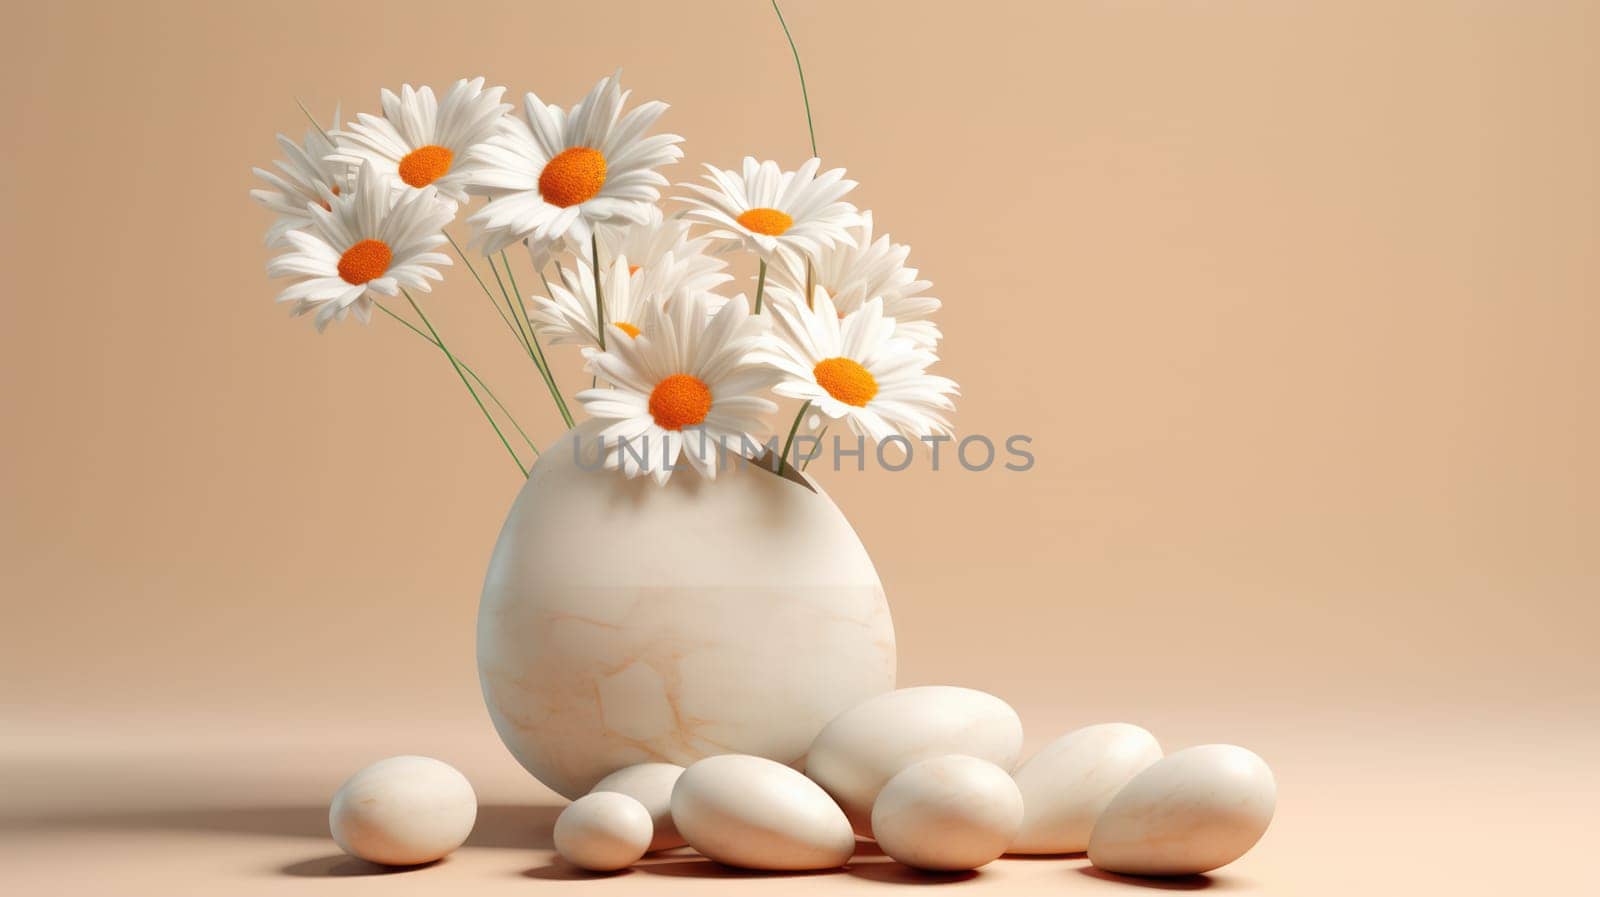 White Spring: Floral Bouquet on Wooden Table, a Bright and Fresh Decoration for a Rustic Holiday Card